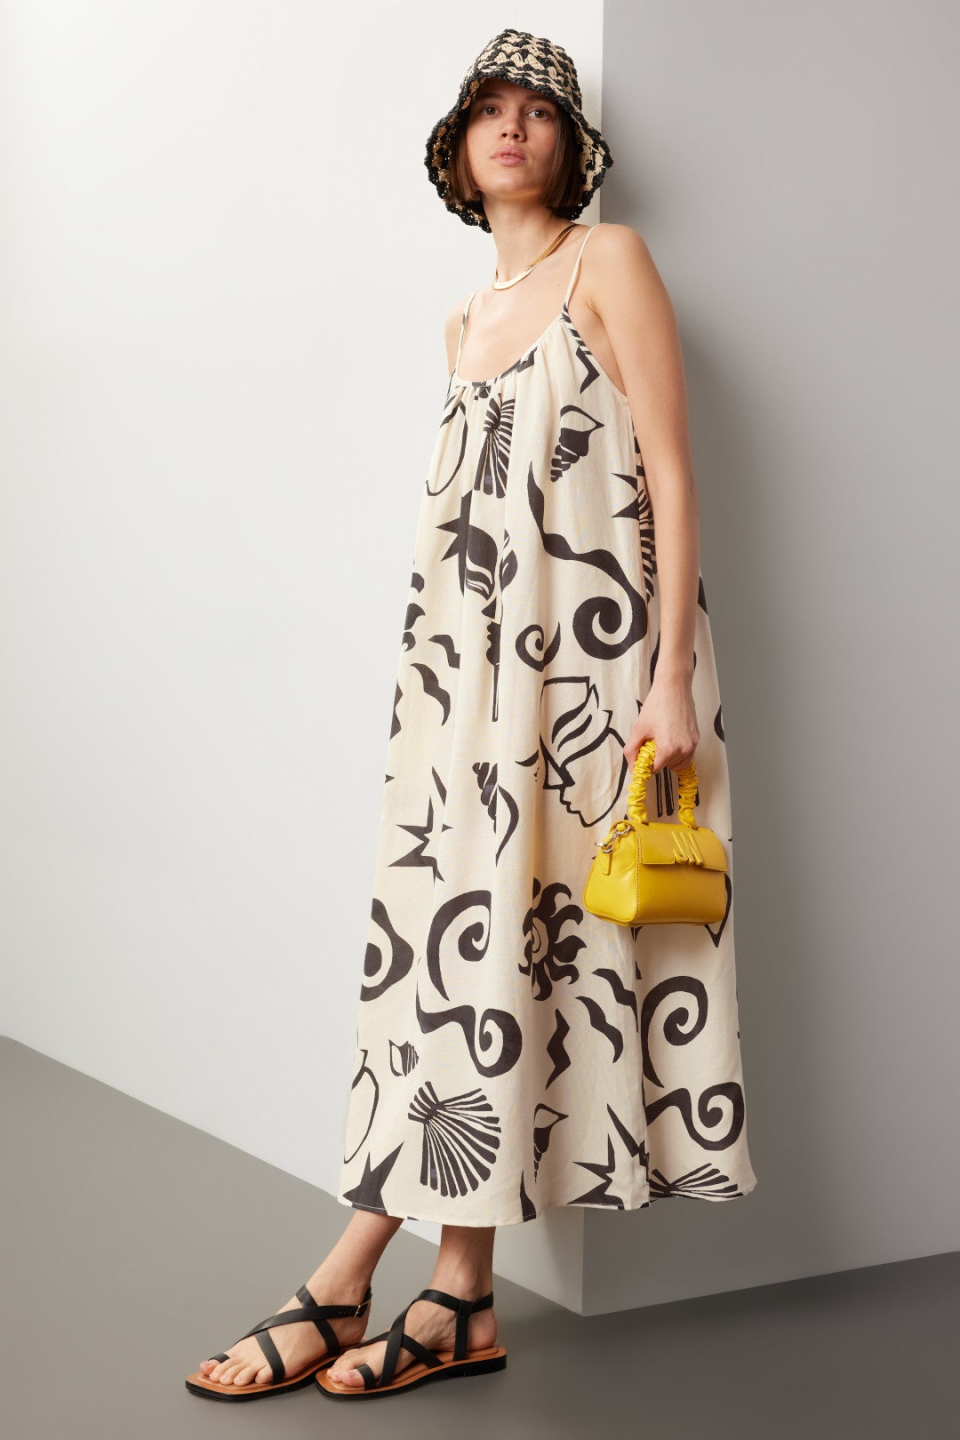 Rent the Runway Untitled in Motion Ophelia Abstract Dress